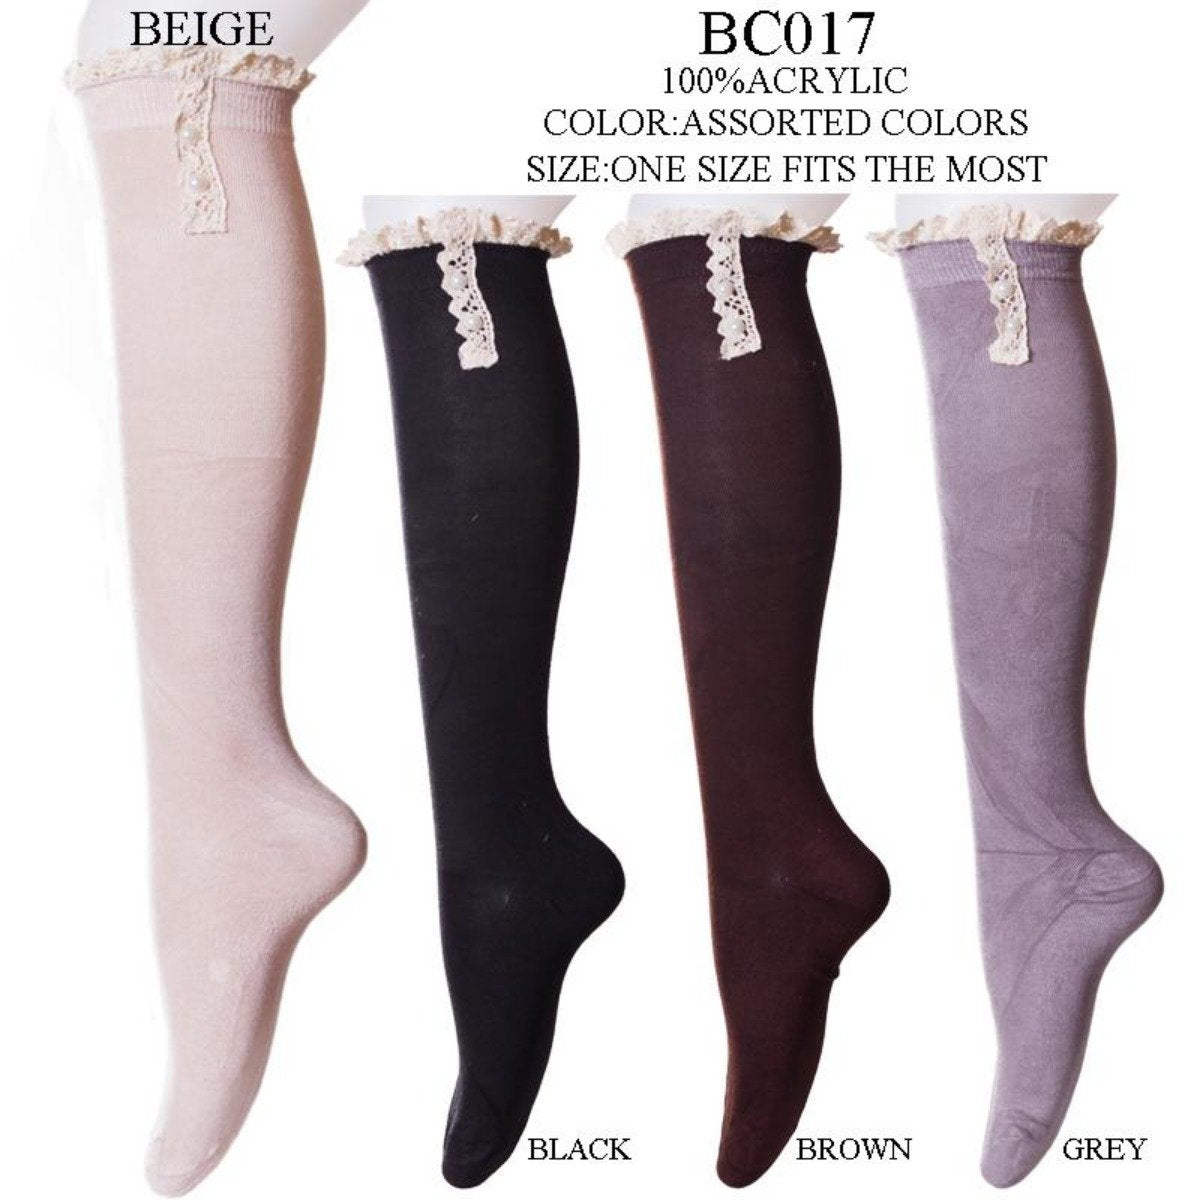 Solid Color Knee-High Stockings W/ Faux Pearls & Lace Trim - 12Pc Set